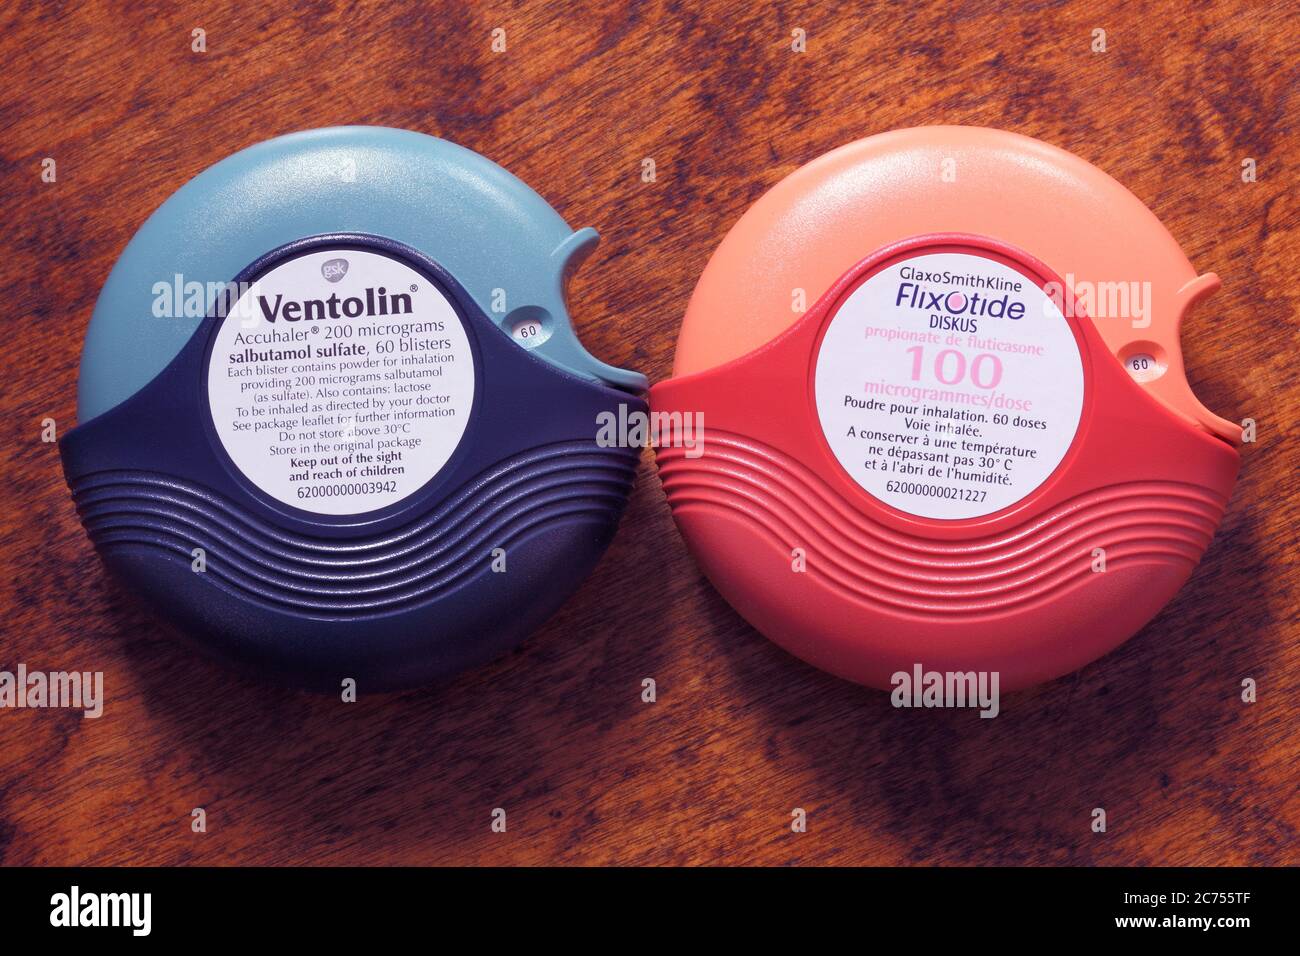 Blue Ventolin asthma reliever and orange Flixotide preventer accuhalers or inhalers Stock Photo